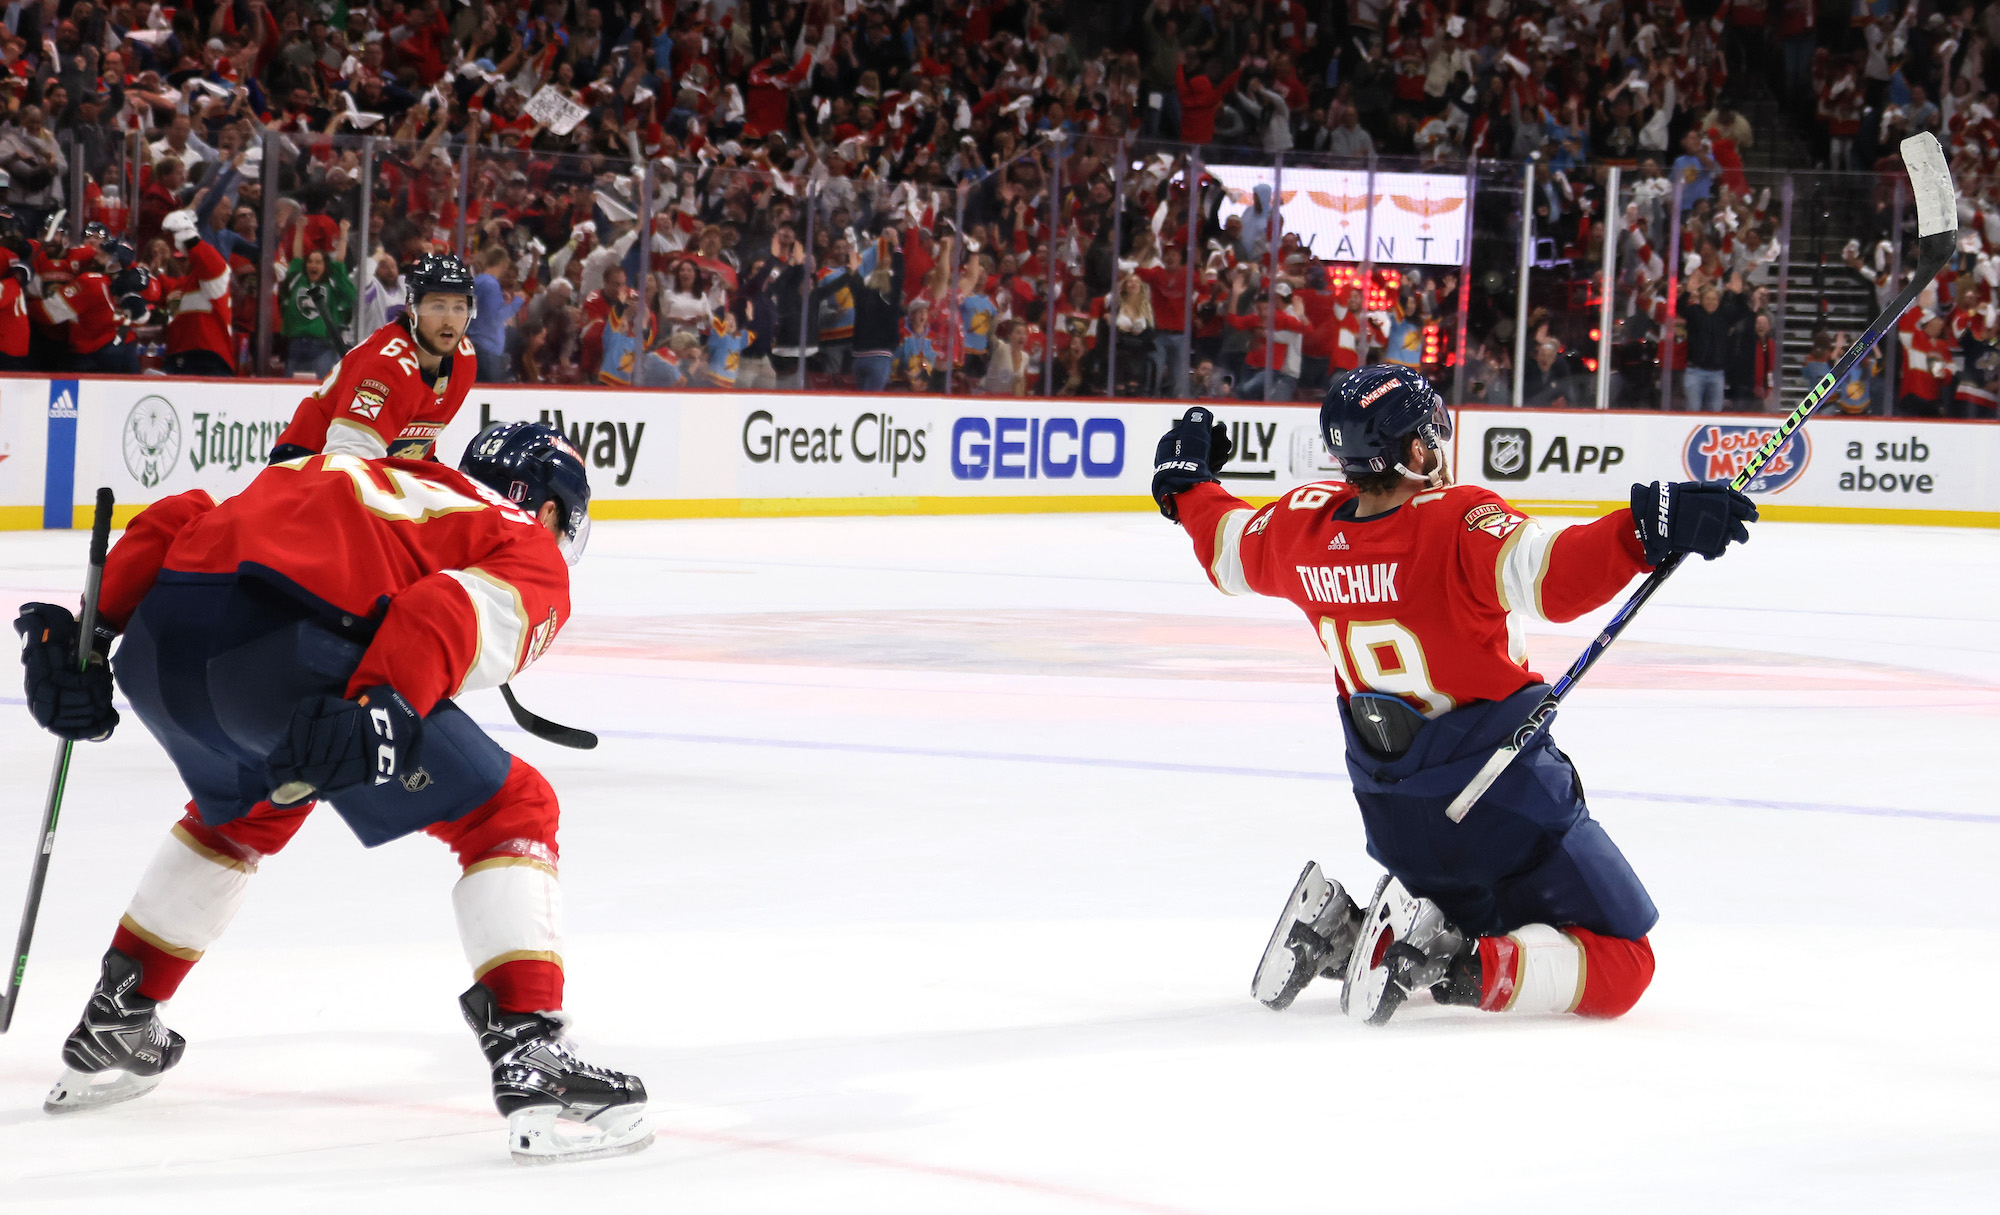 SUNRISE, FLORIDA - MAY 24: Matthew Tkachuk #19 of the Florida Panthers celebrates with his teammates after scoring the game winning goal on Frederik Andersen #31 of the Carolina Hurricanes during the third period in Game Four of the Eastern Conference Final of the 2023 Stanley Cup Playoffs at FLA Live Arena on May 24, 2023 in Sunrise, Florida. (Photo by Bruce Bennett/Getty Images)